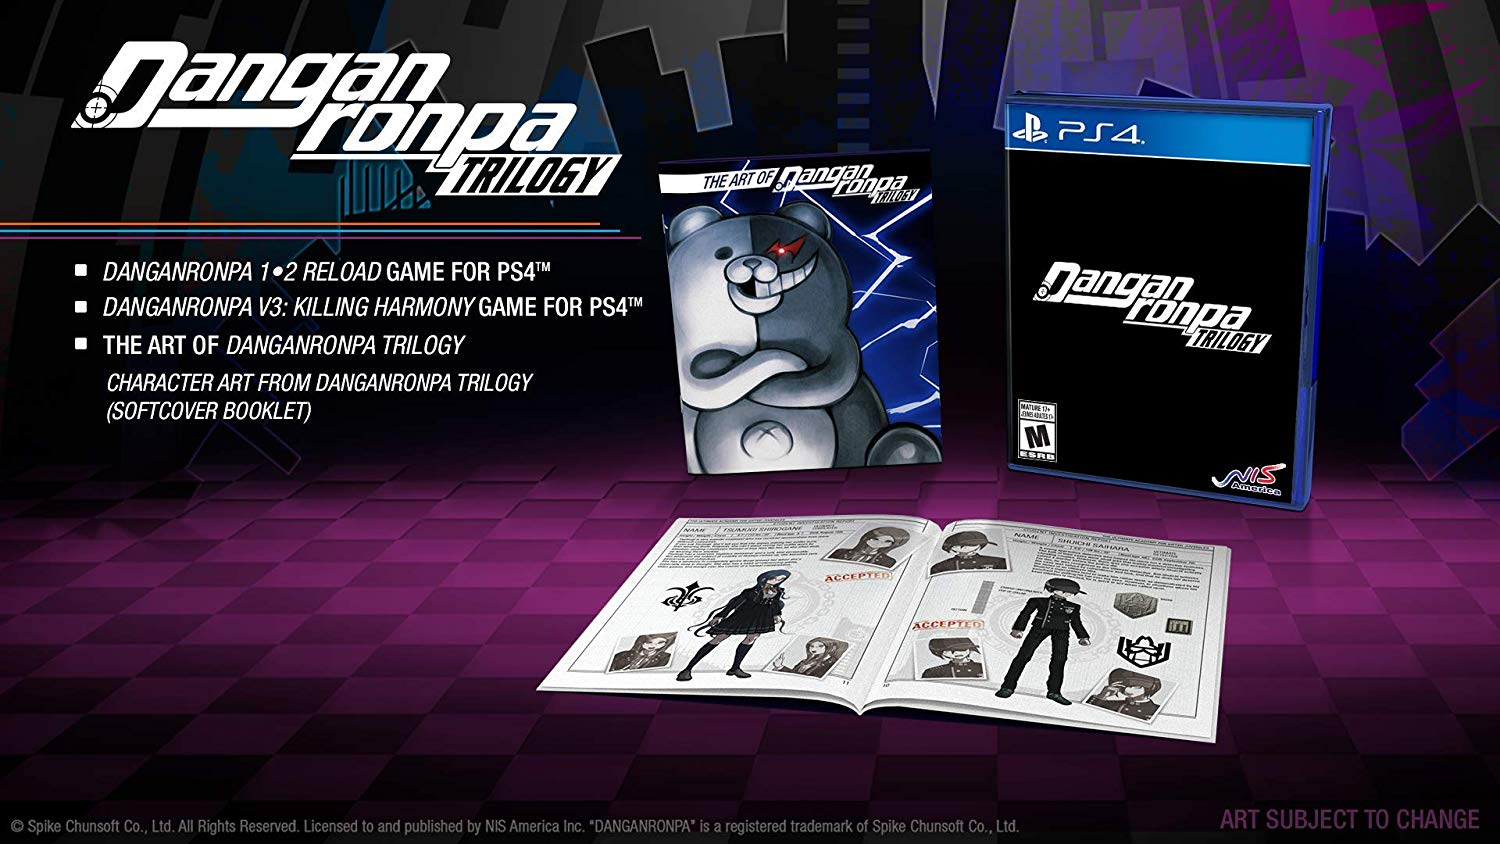 Danganronpa Trilogy, PlayStation 4, PS4, Europe, US, North America, price, pre-order, release date, gameplay, features, screenshots, NIS America